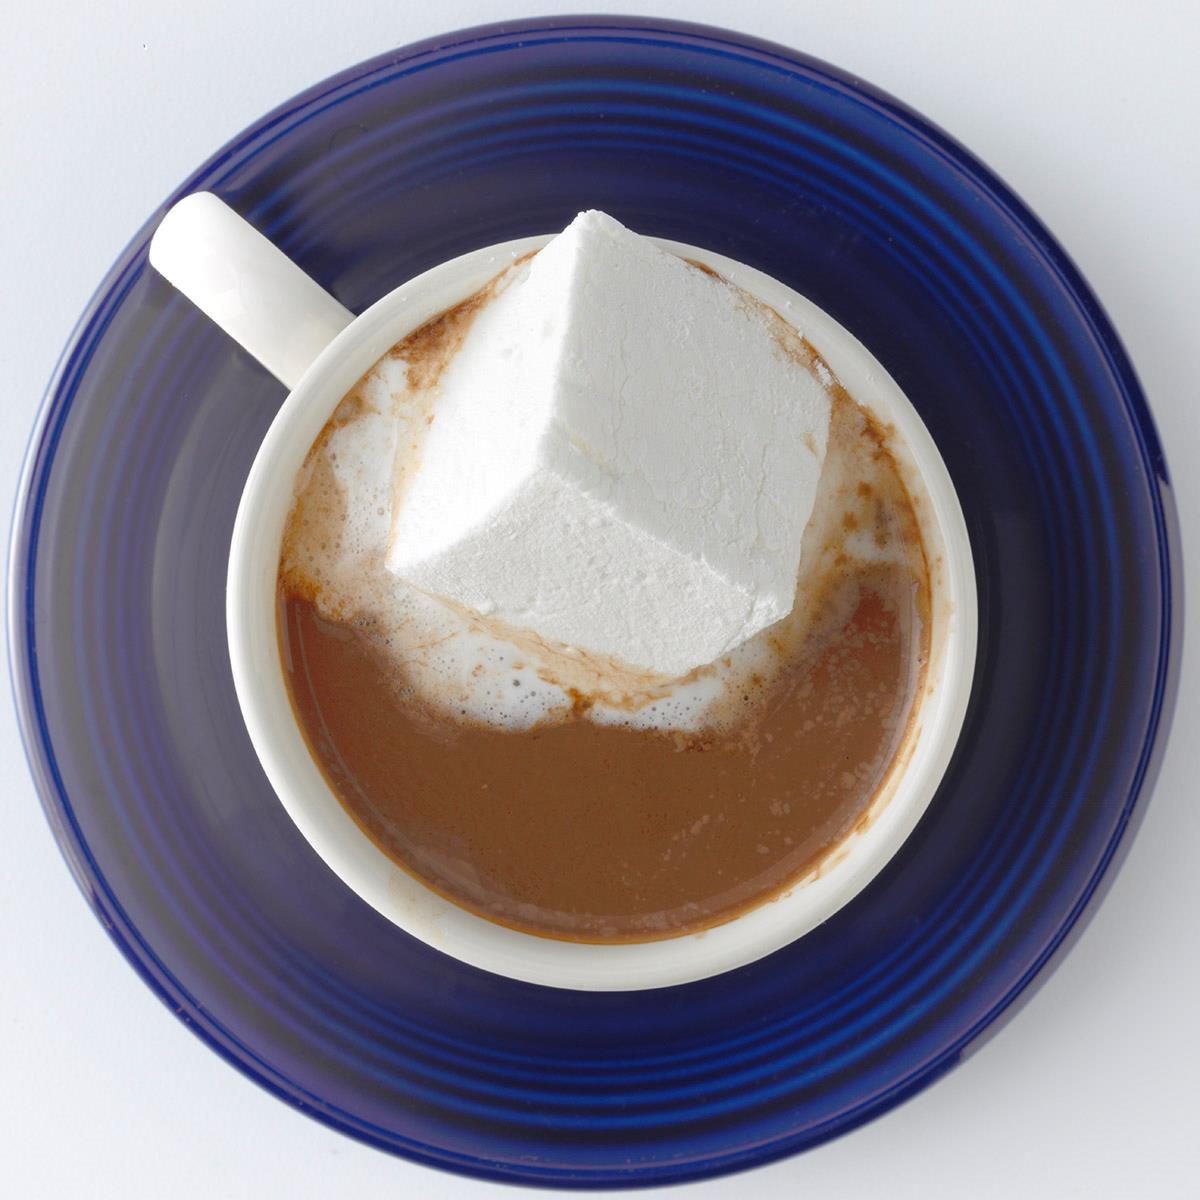 https://www.tasteofhome.com/wp-content/uploads/2018/01/Hot-Cocoa-with-Almond-Milk_EXPS_THD18_179471_B08_03_3b-3.jpg?fit=700%2C1024